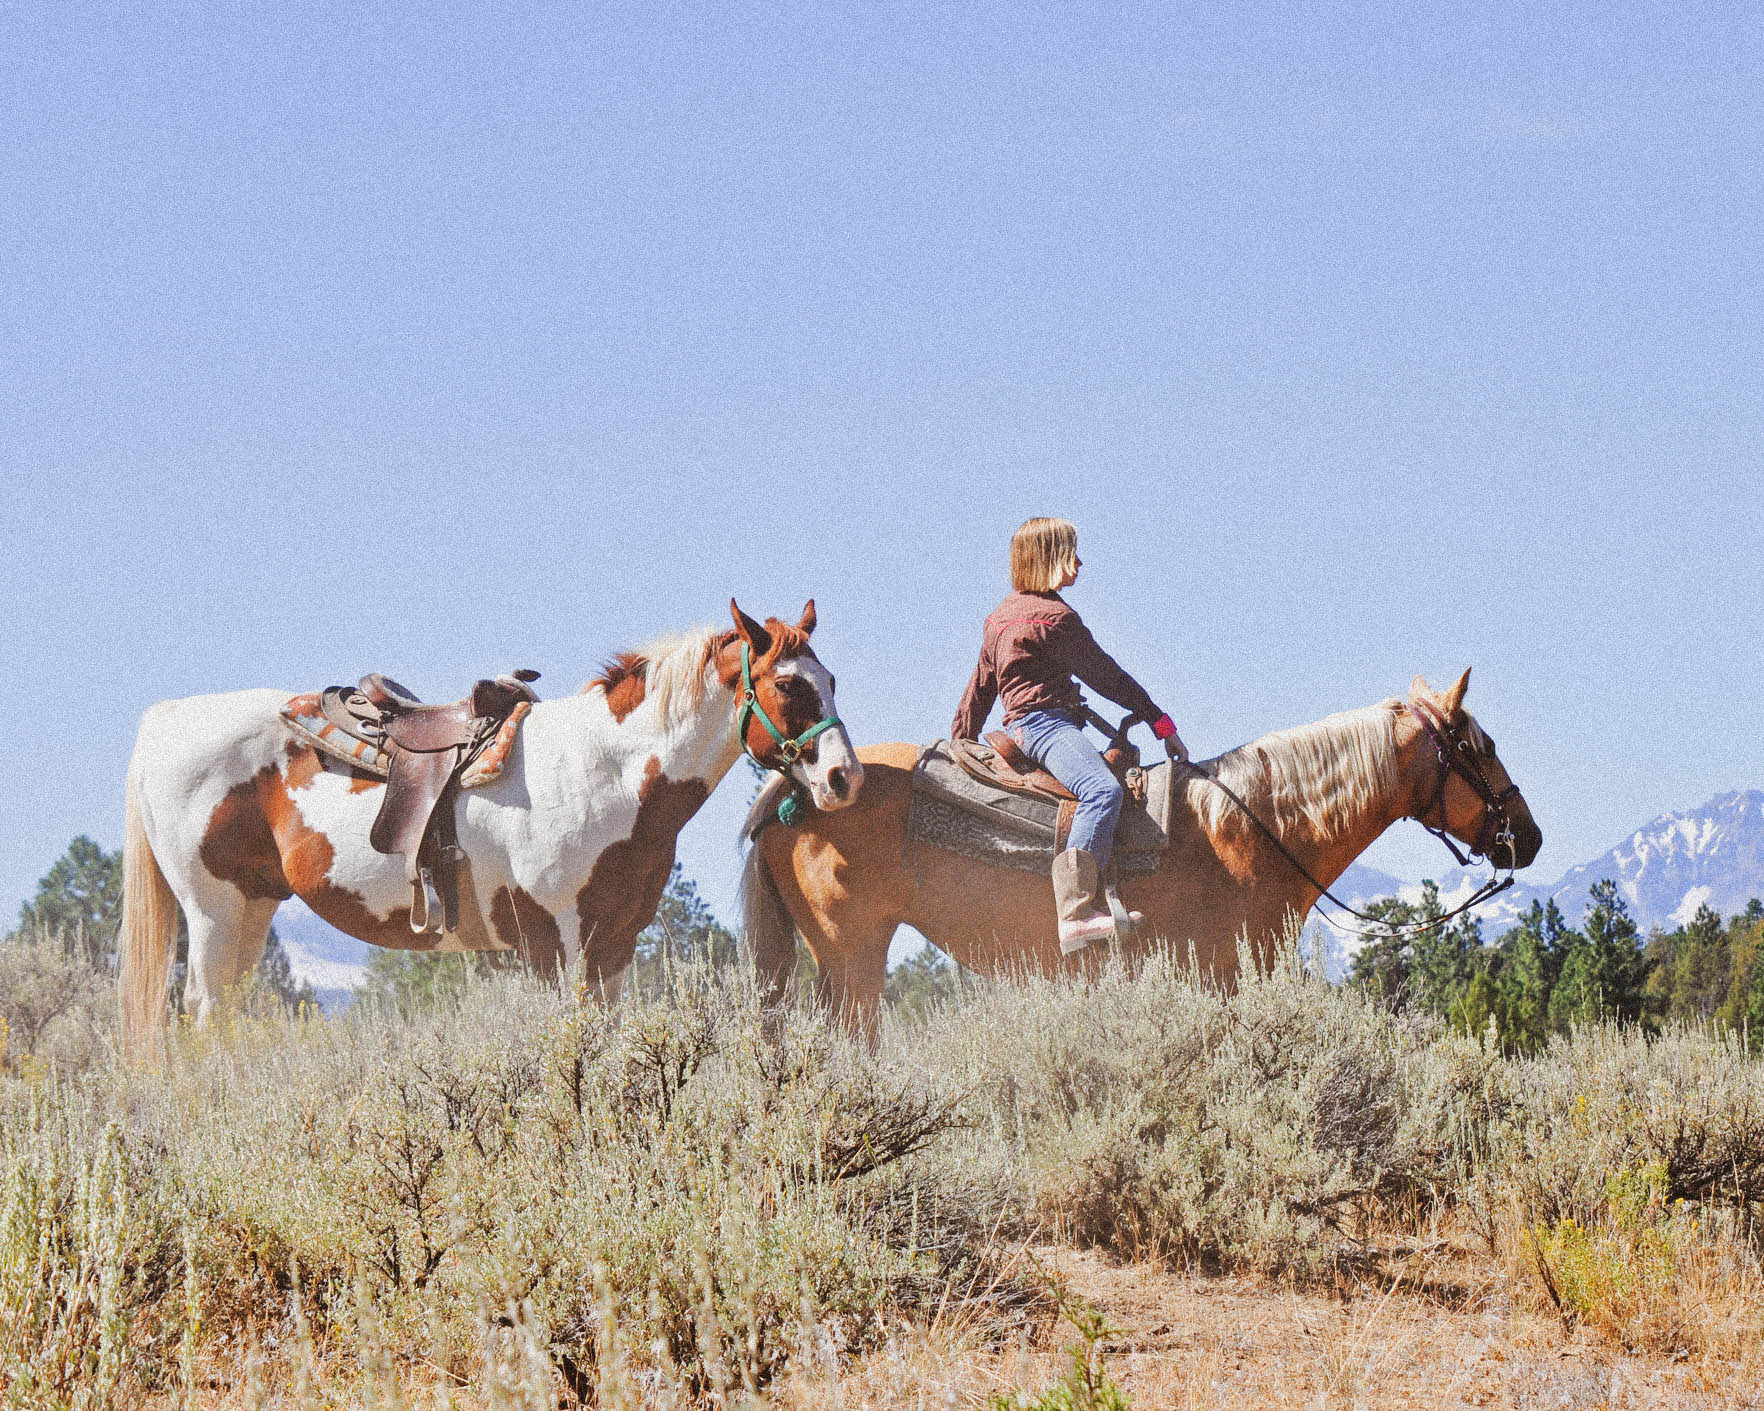 A child rides horses in Central Oregon.